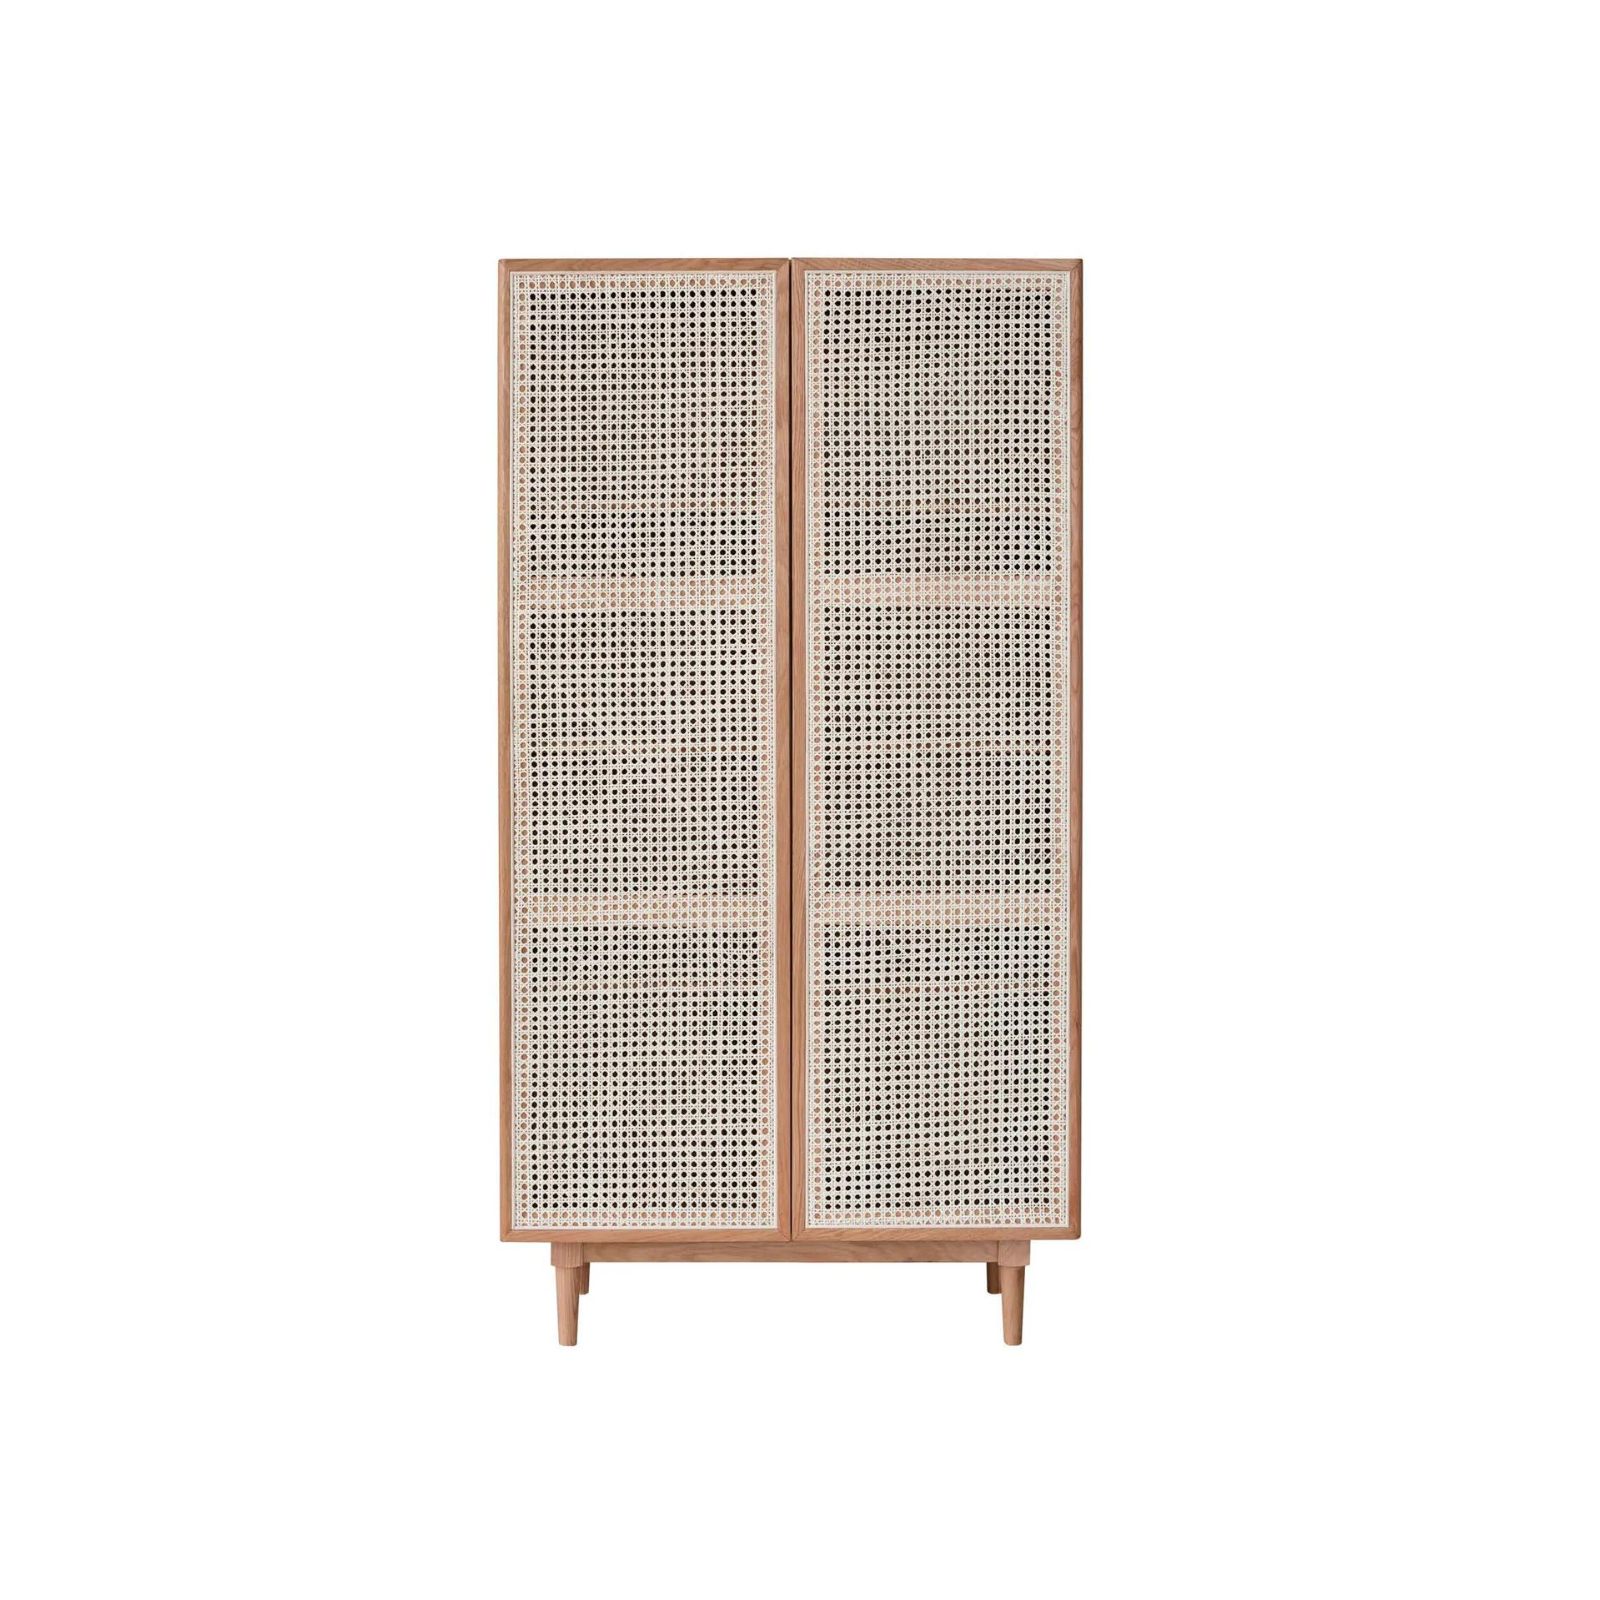 Christopher Full Doors Bookcase - Natural